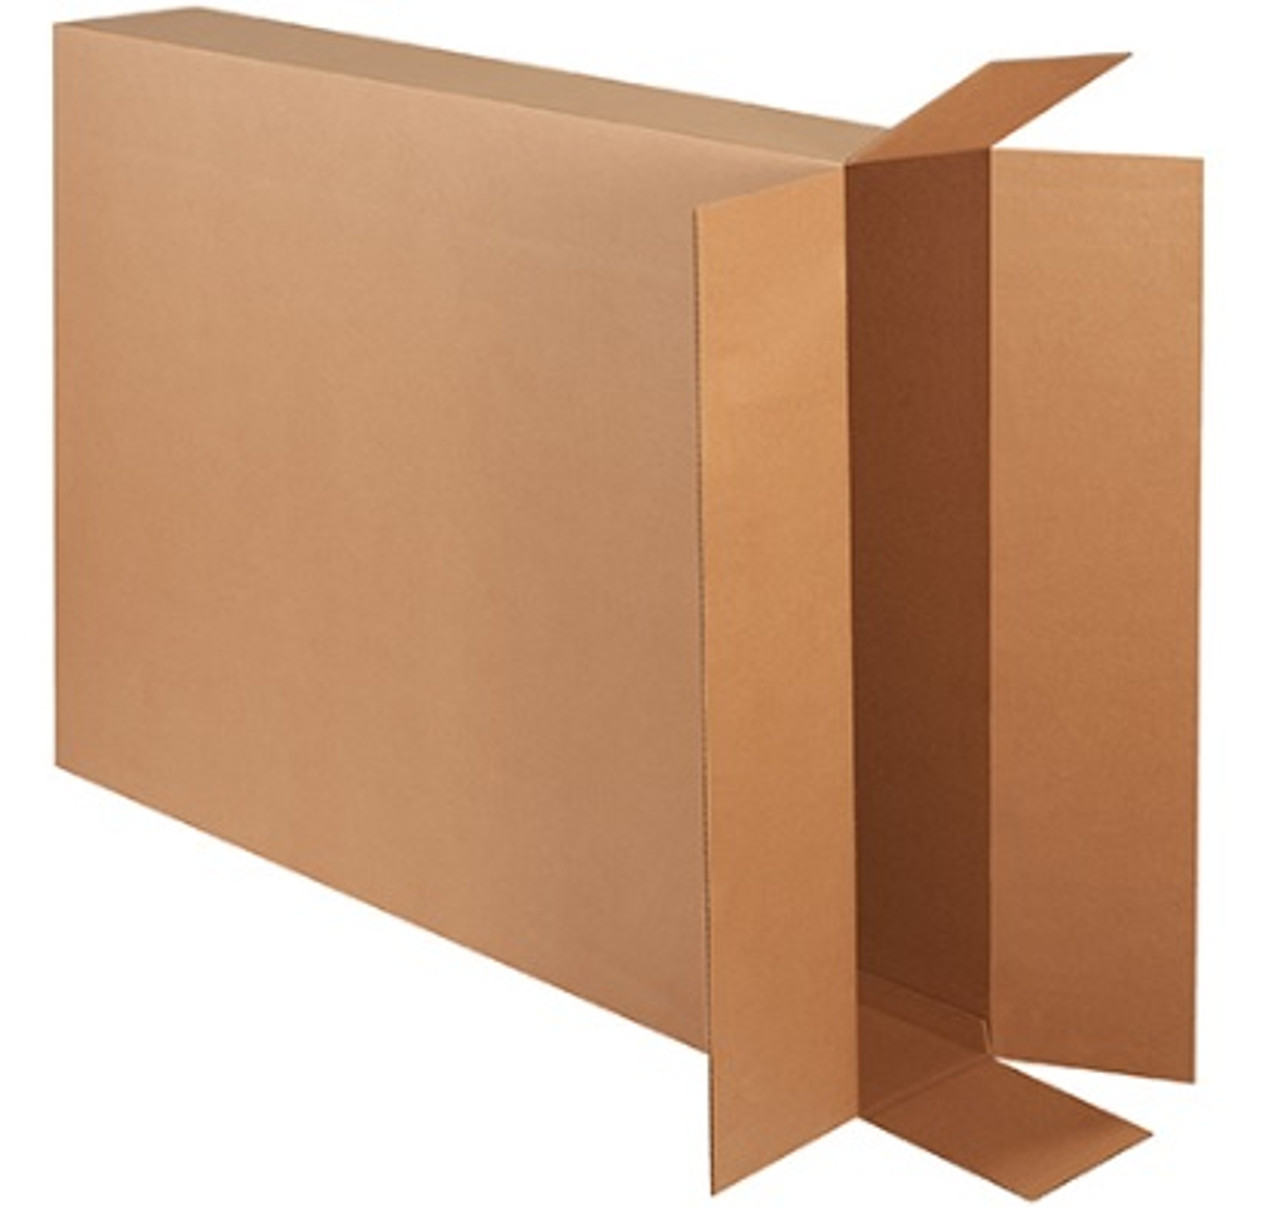 5 ply Brown Corrugated Boxes Carton Size 60 x 40 x 50 - KMT Packaging